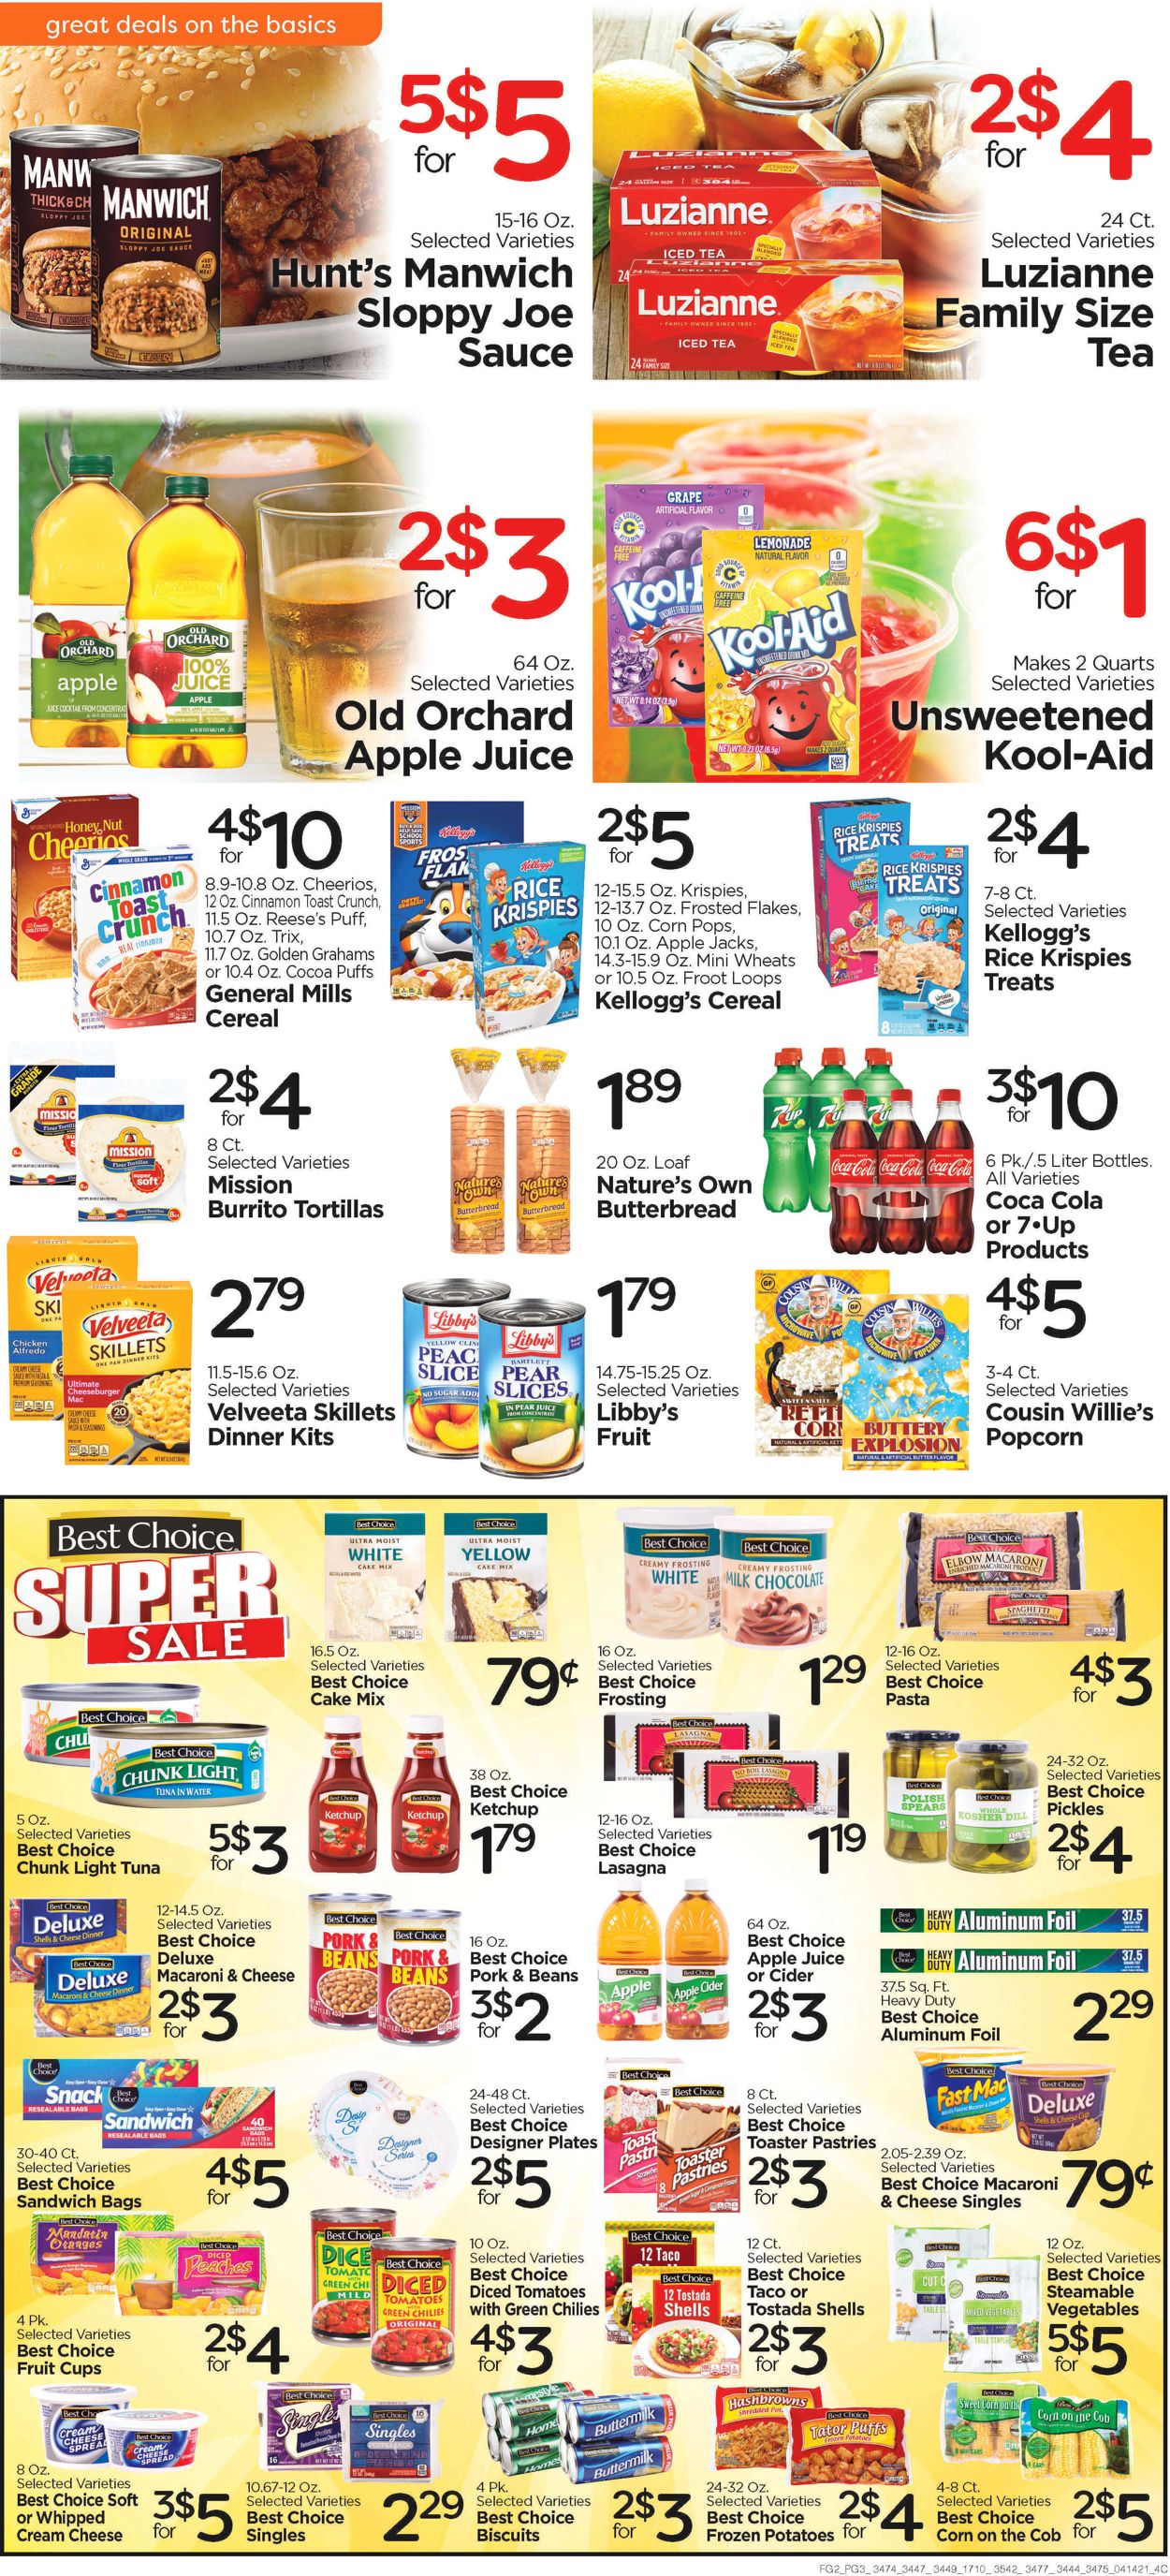 Catalogue Edwards Food Giant from 04/14/2021